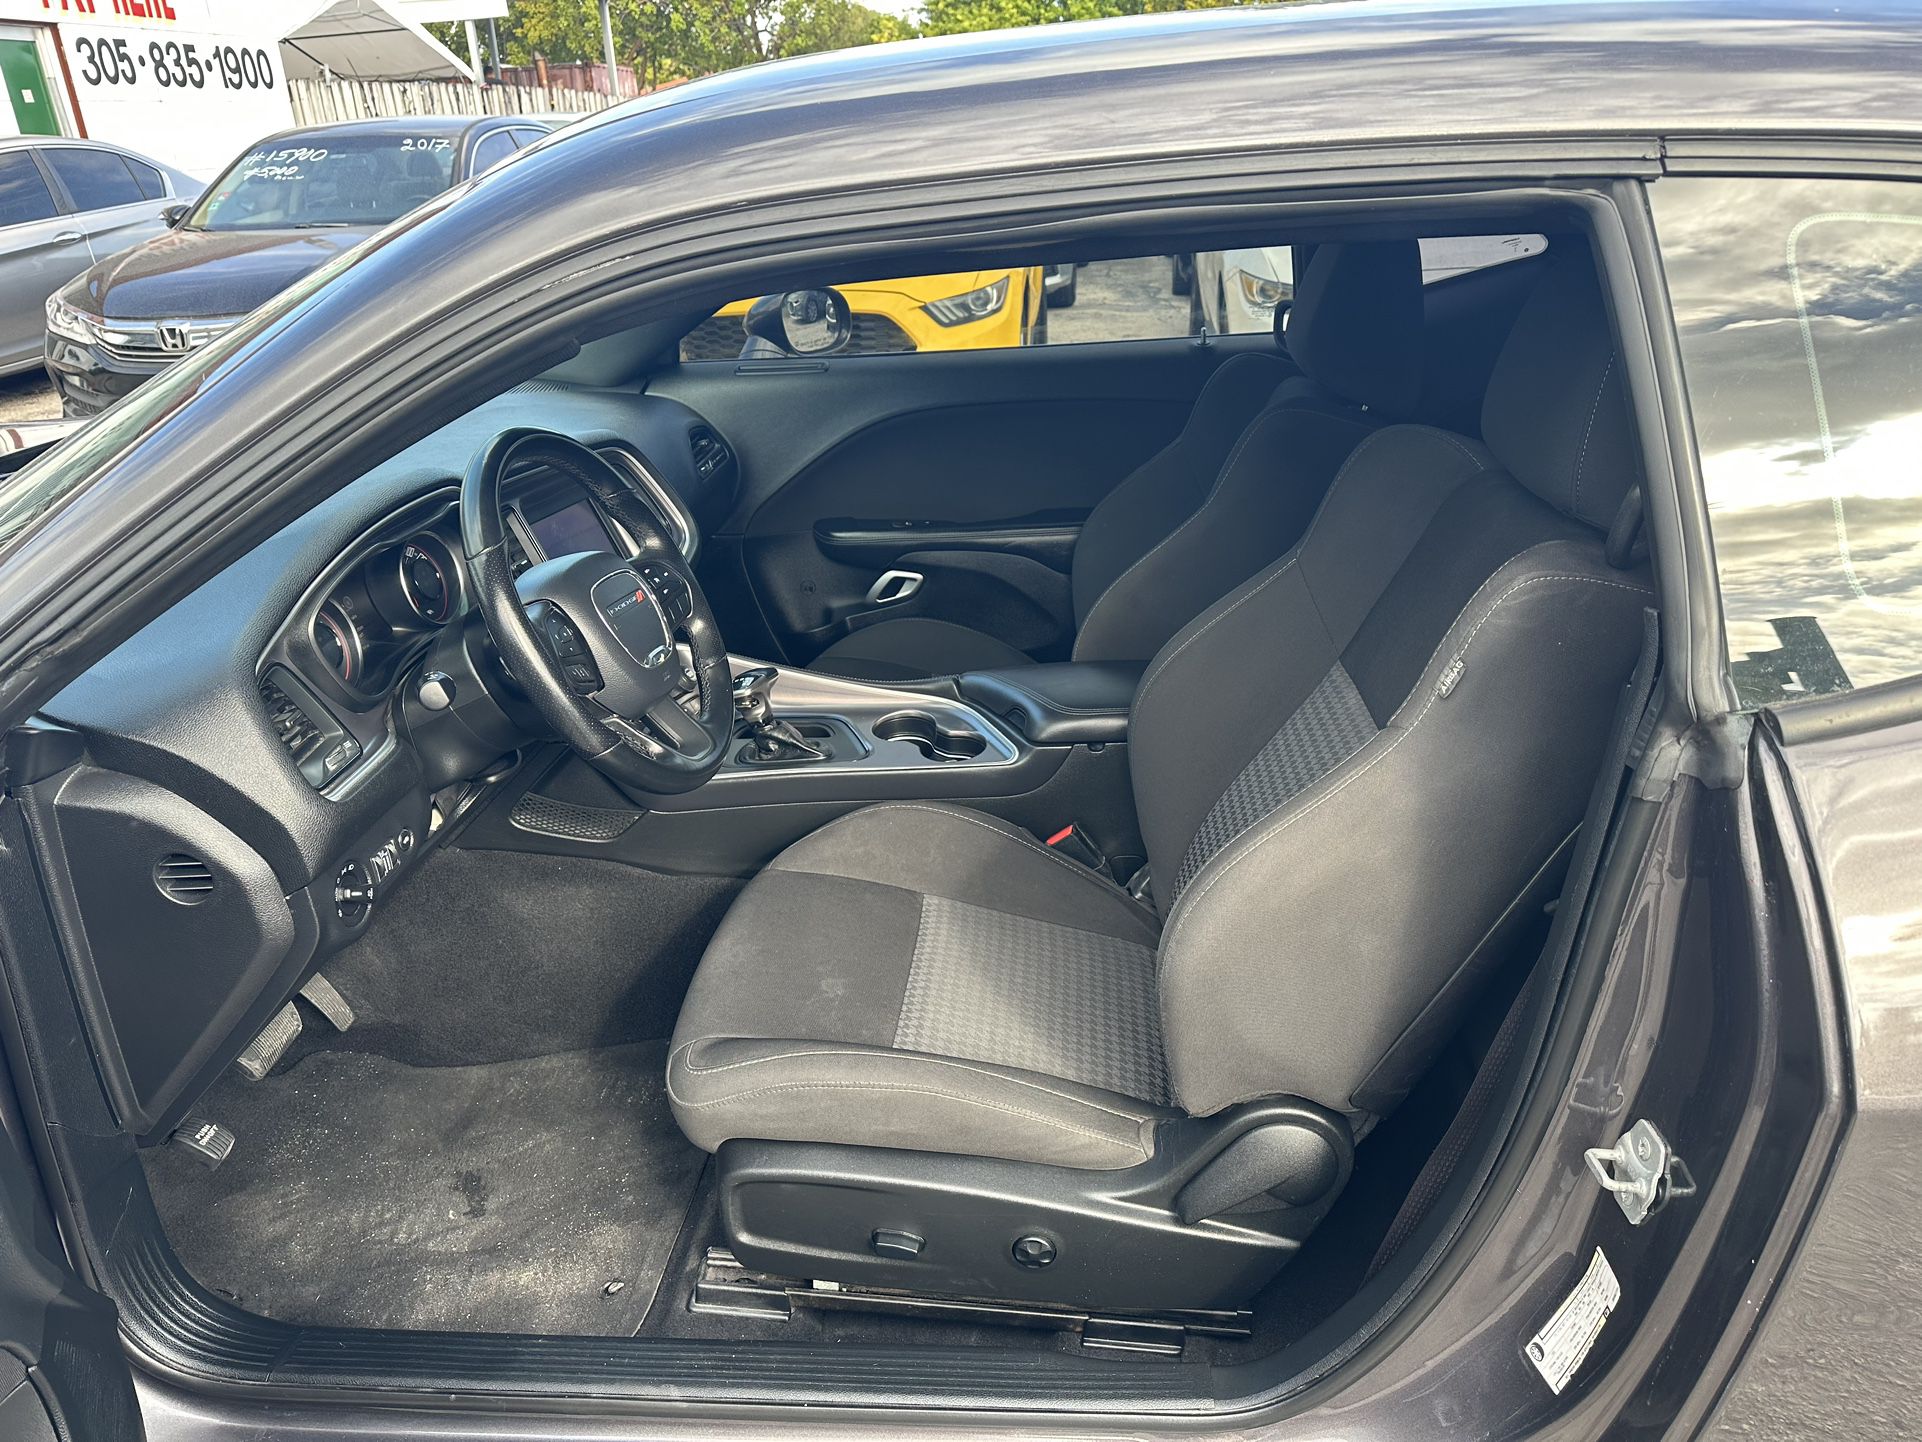 used 2020 dodge challenger - interior view 1